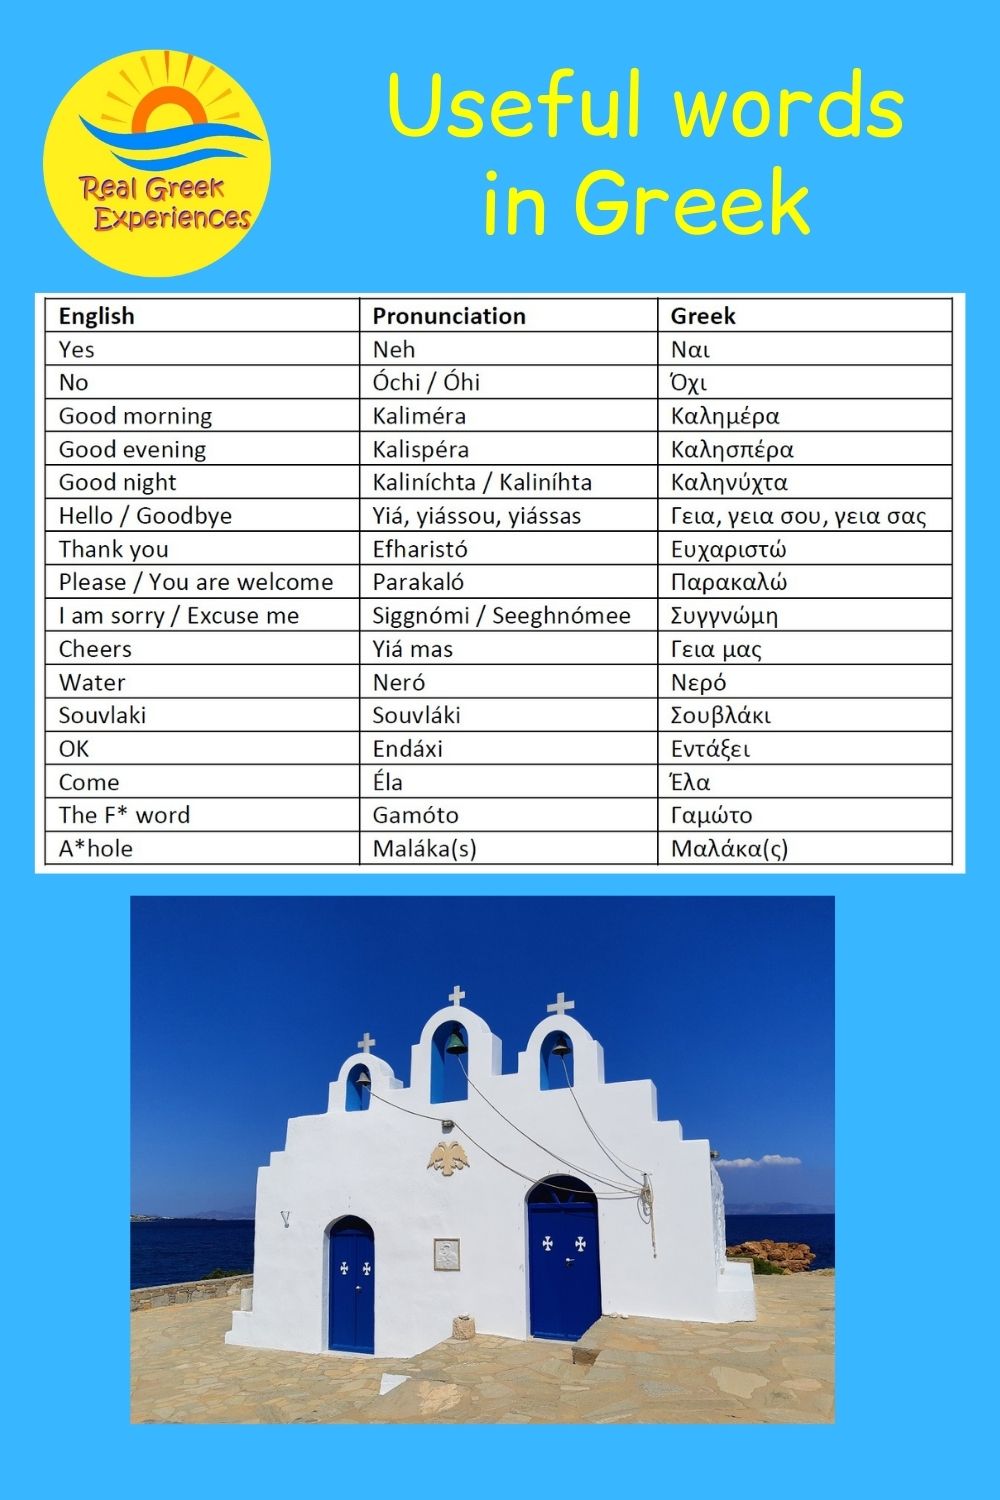 Greek words to learn before your trip to Greece